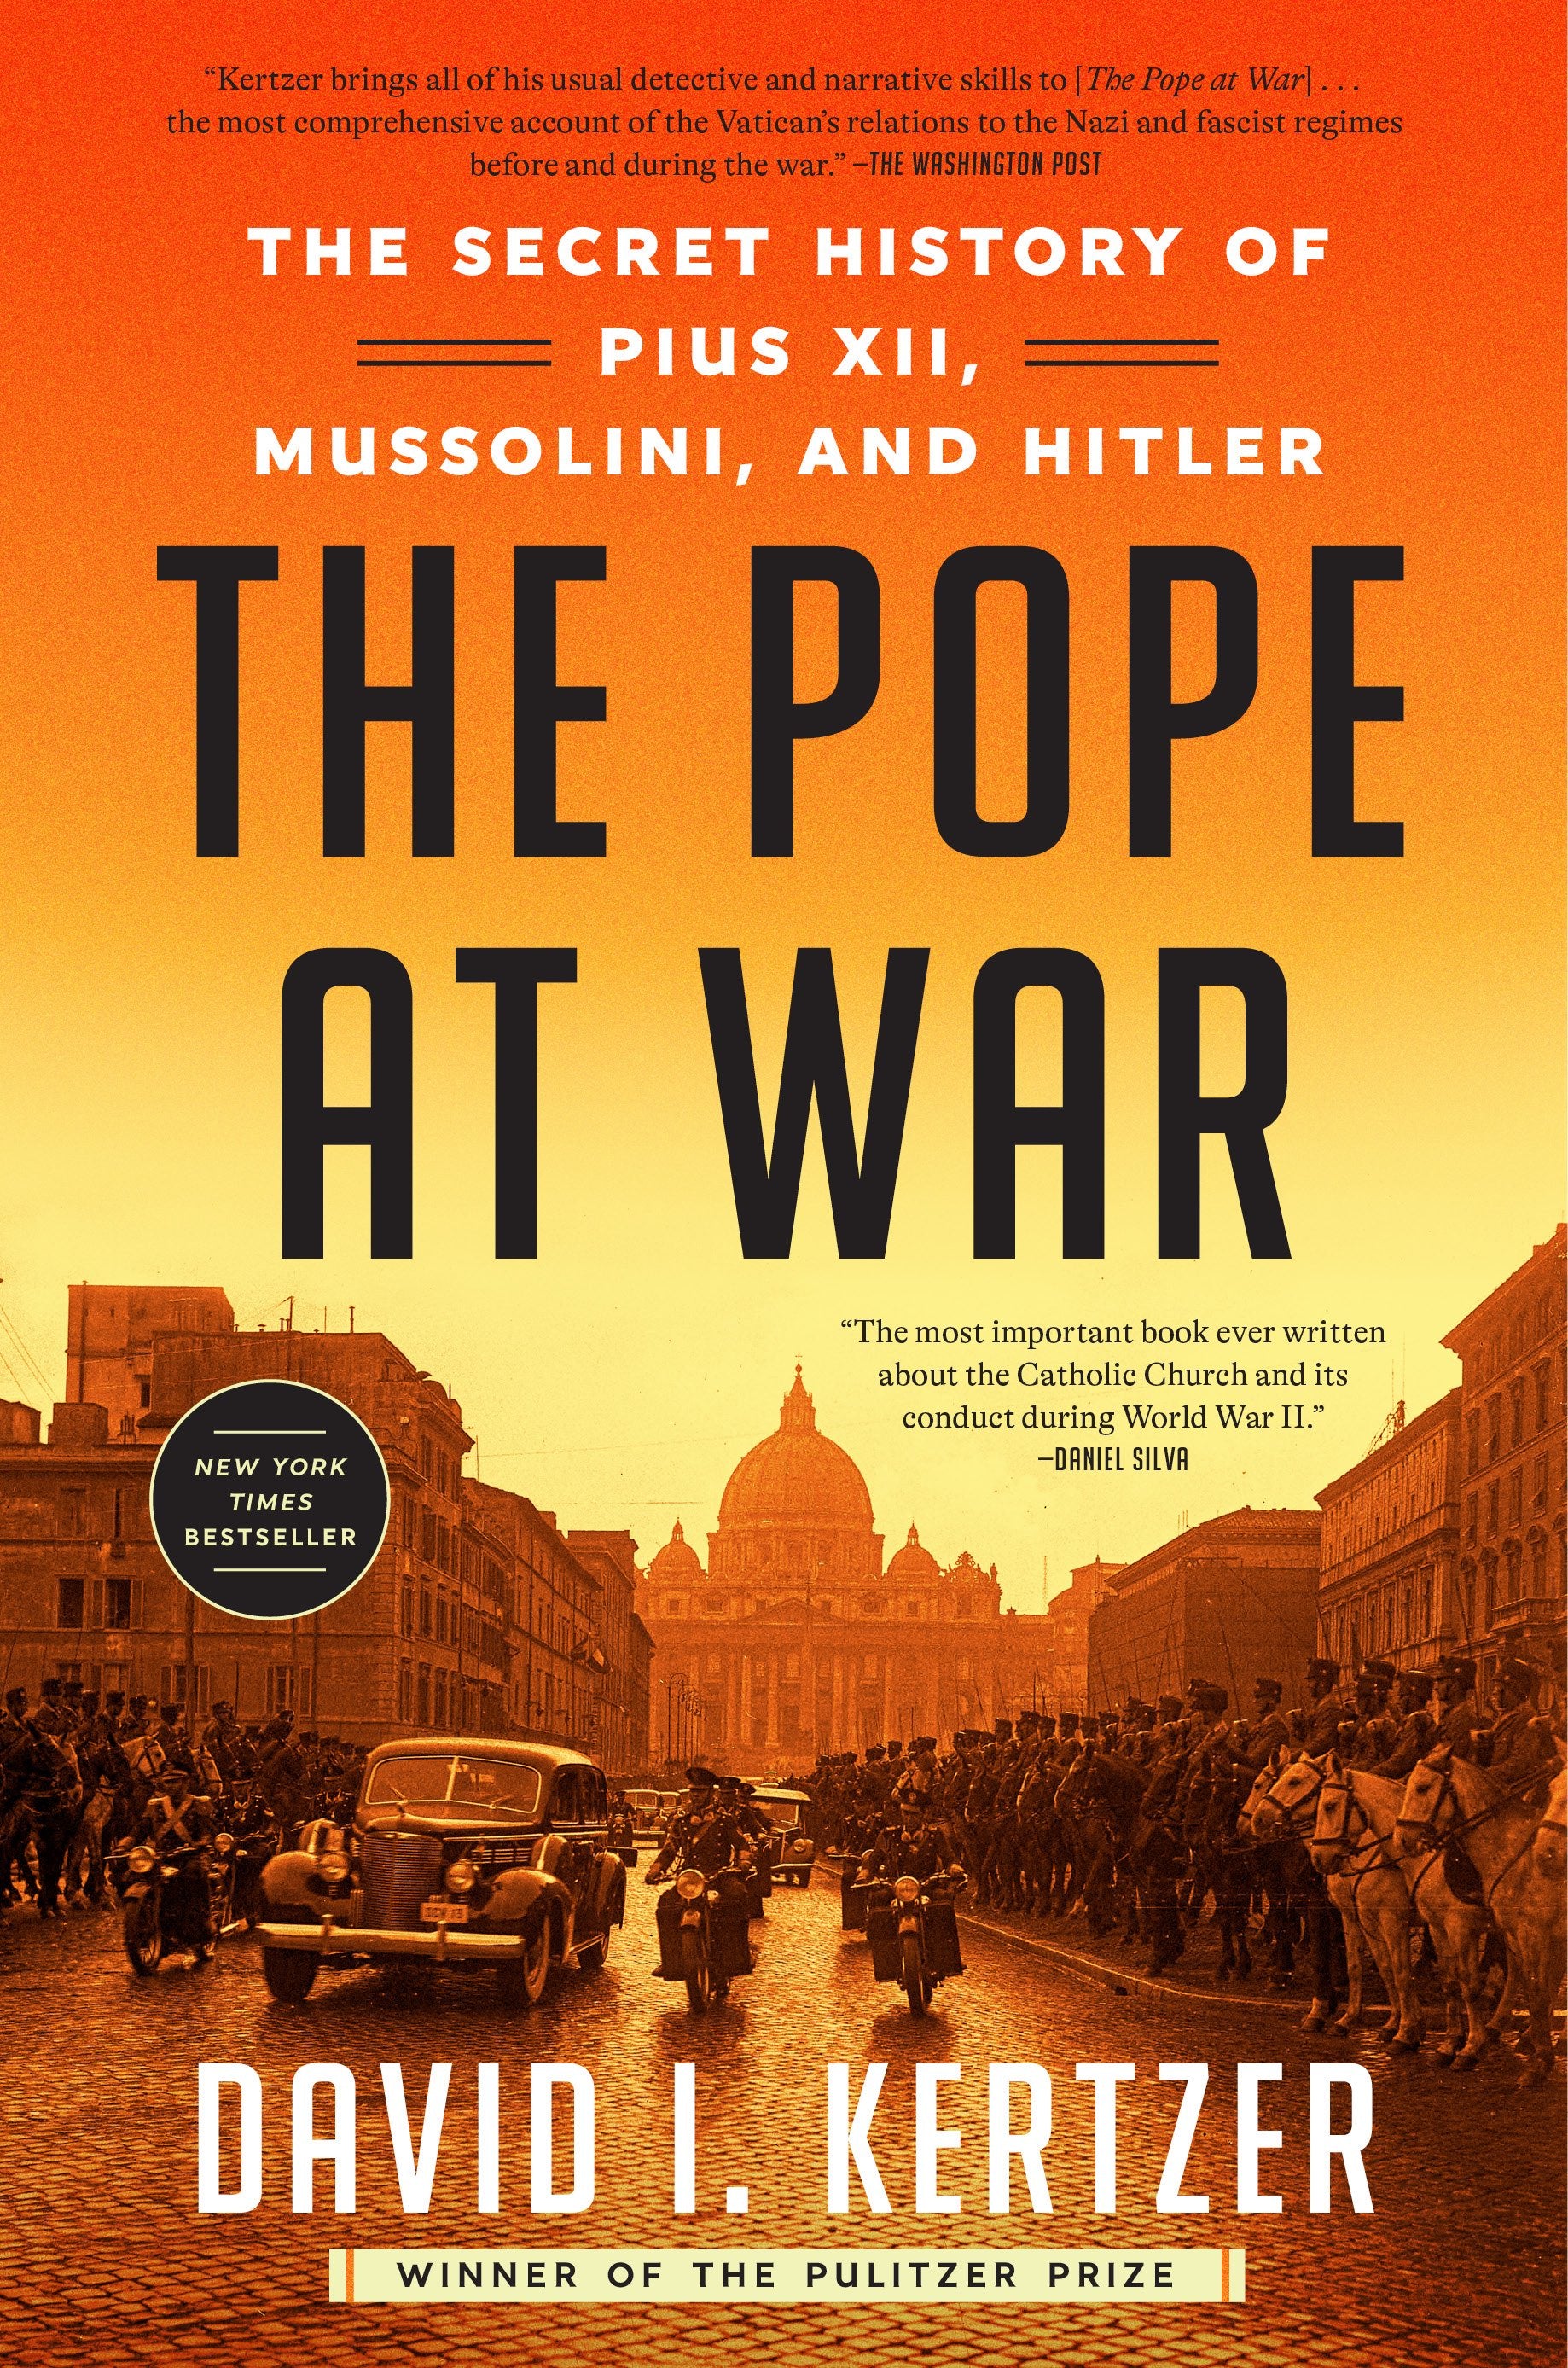 The Pope at War